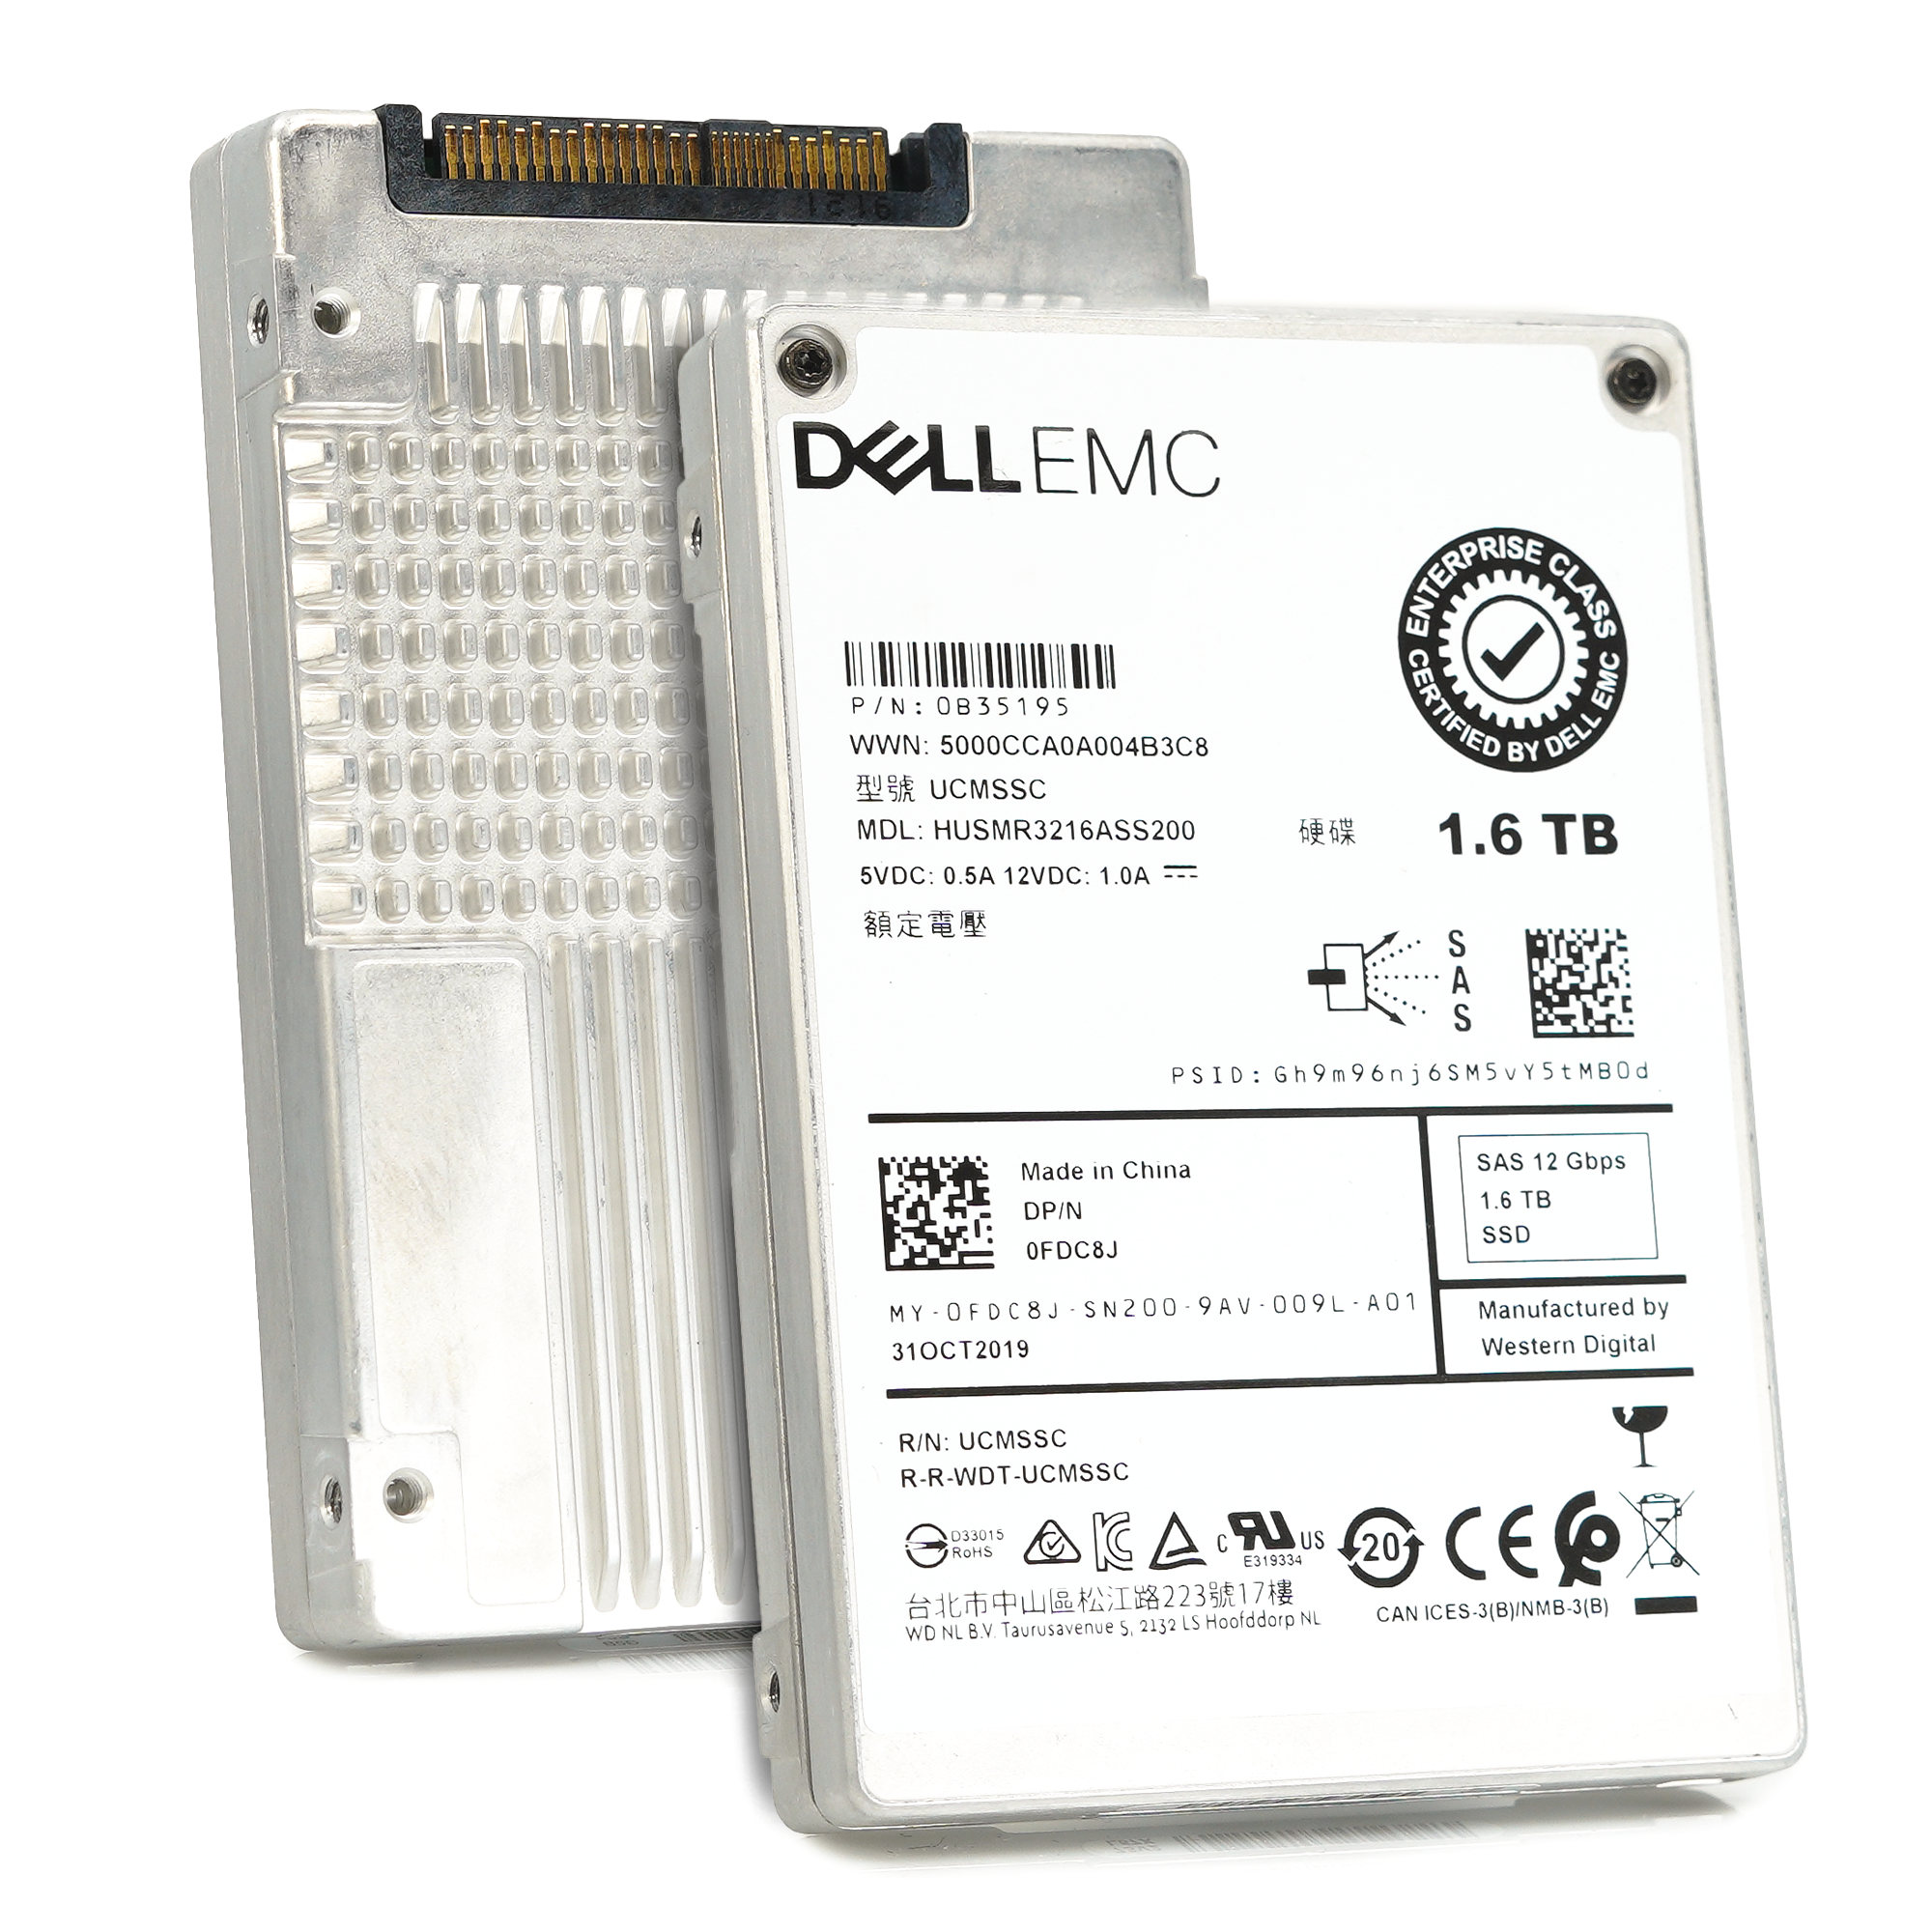 Dell Ultrastar DC SS300 FDC8J HUSMR3216ASS200 1.6TB SAS 12Gb/s 2.5in Recertified Solid State Drive